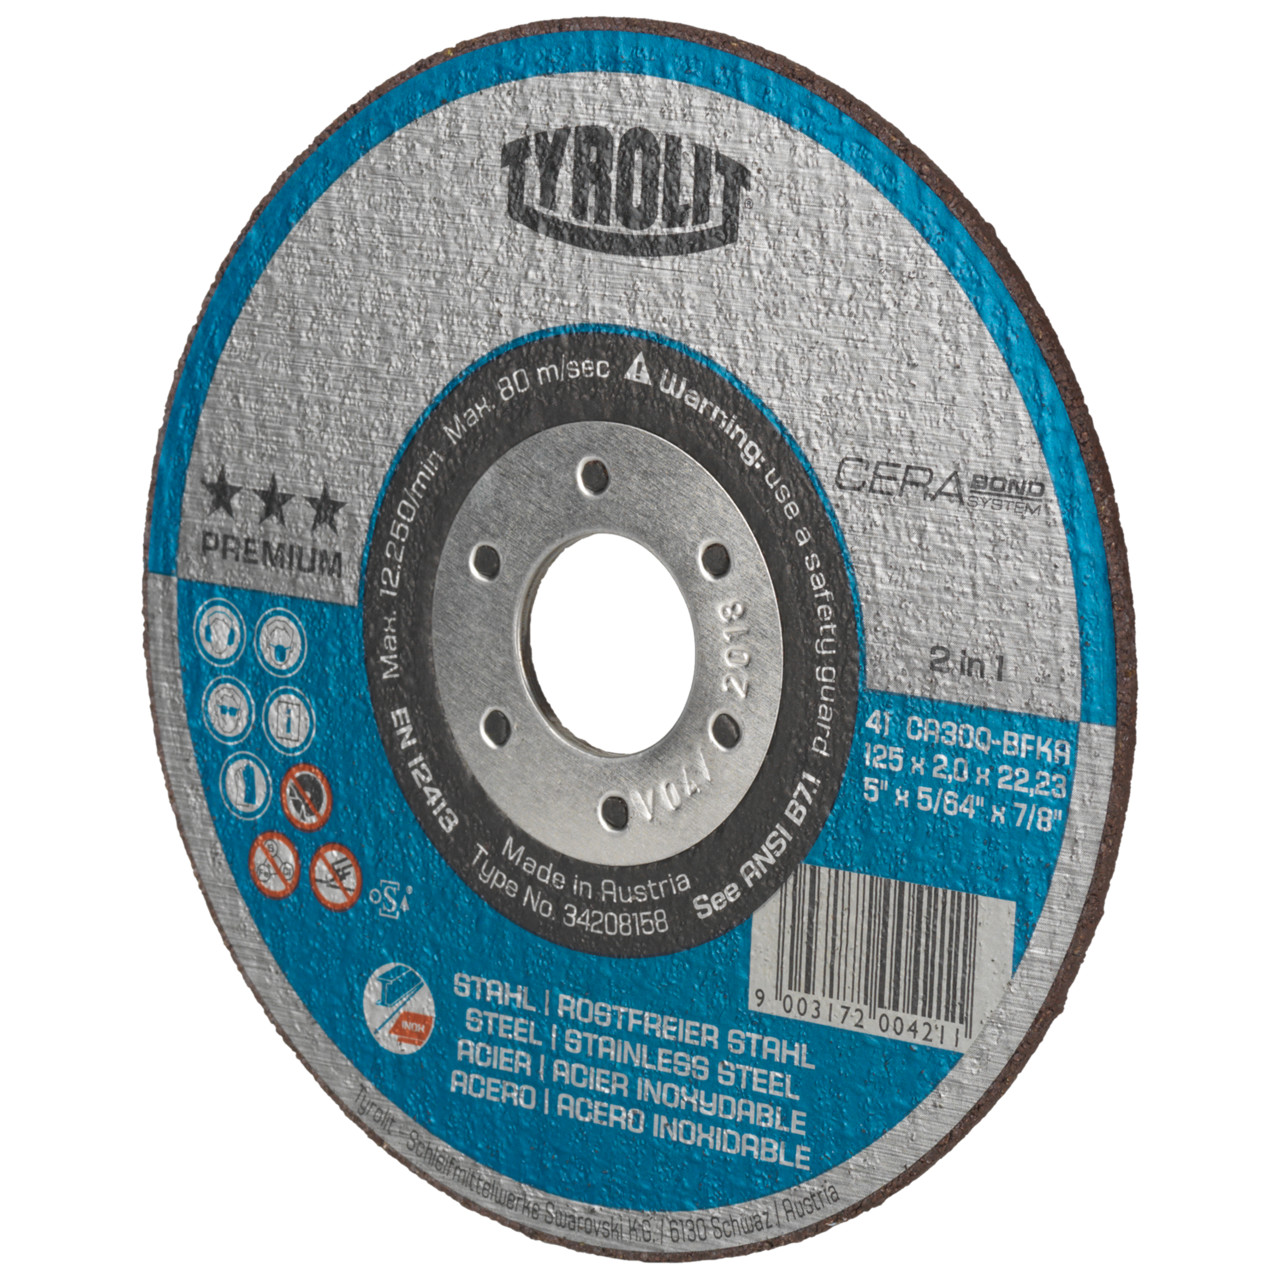 TYROLIT CERABOND Cutting disc DxDxH 178x1.6x22.23 2in1 for steel and stainless steel, shape: 41 - straight version, Art. 34256275